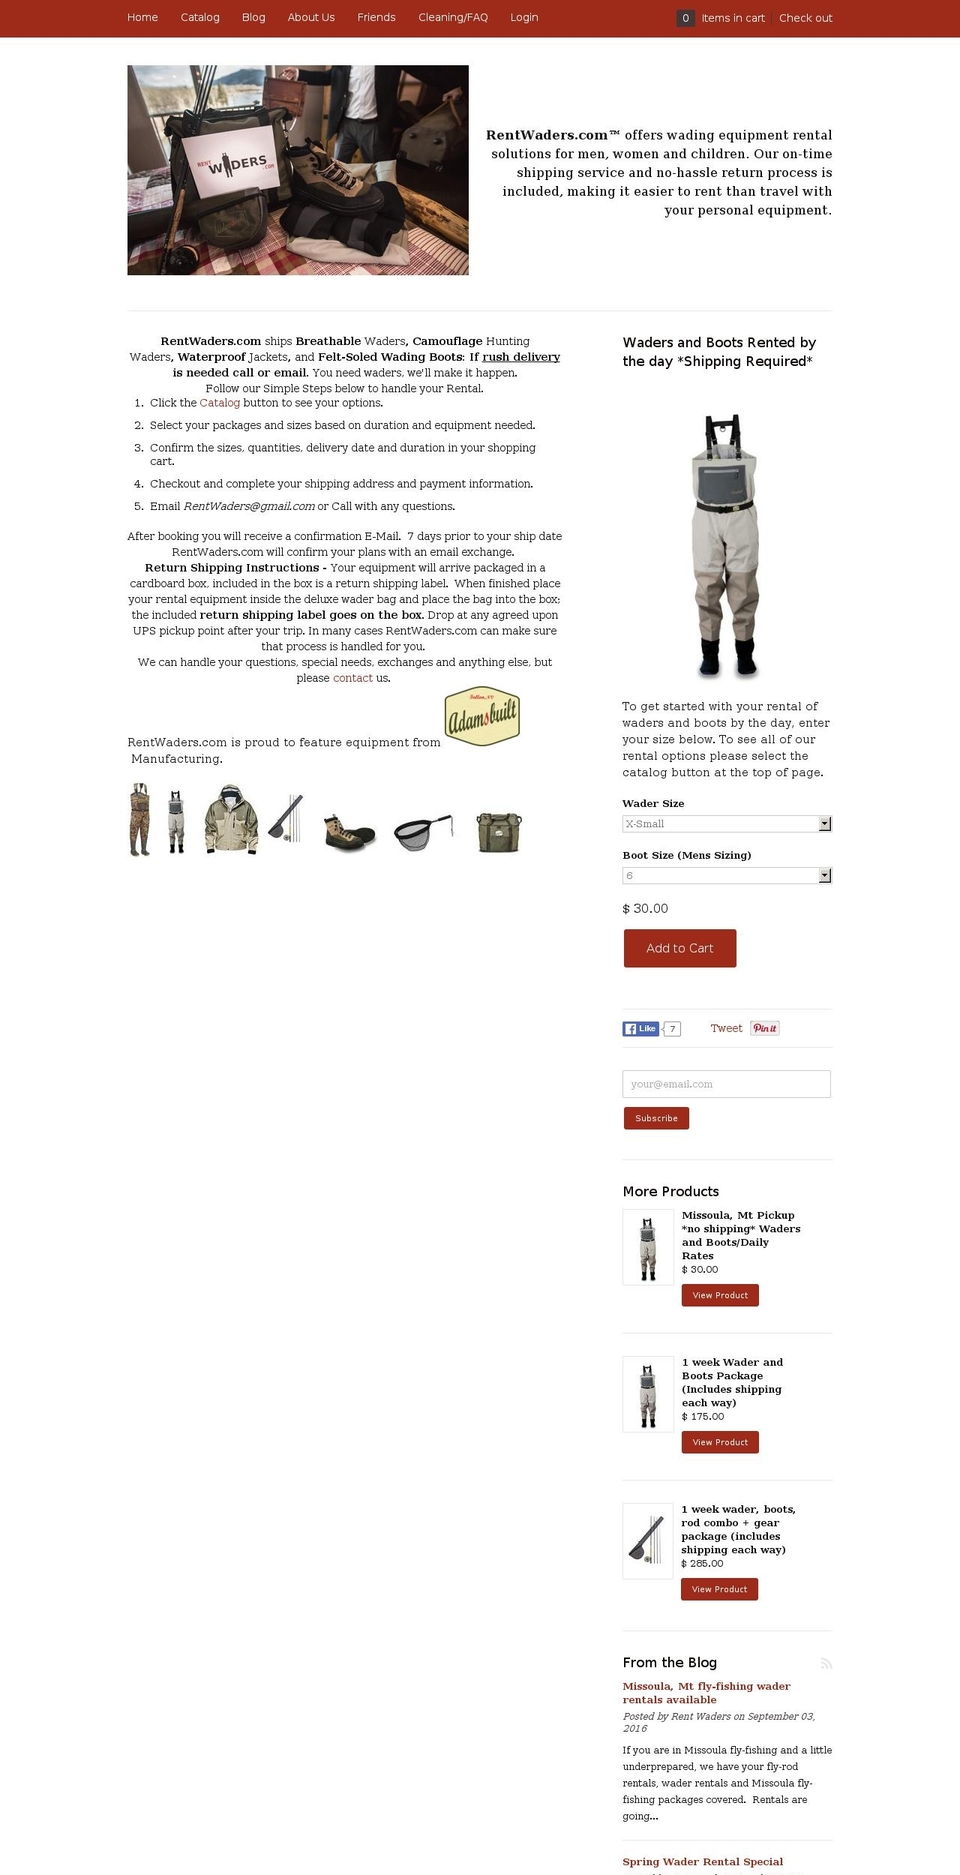 Kickstand Shopify theme site example rentwaders.com